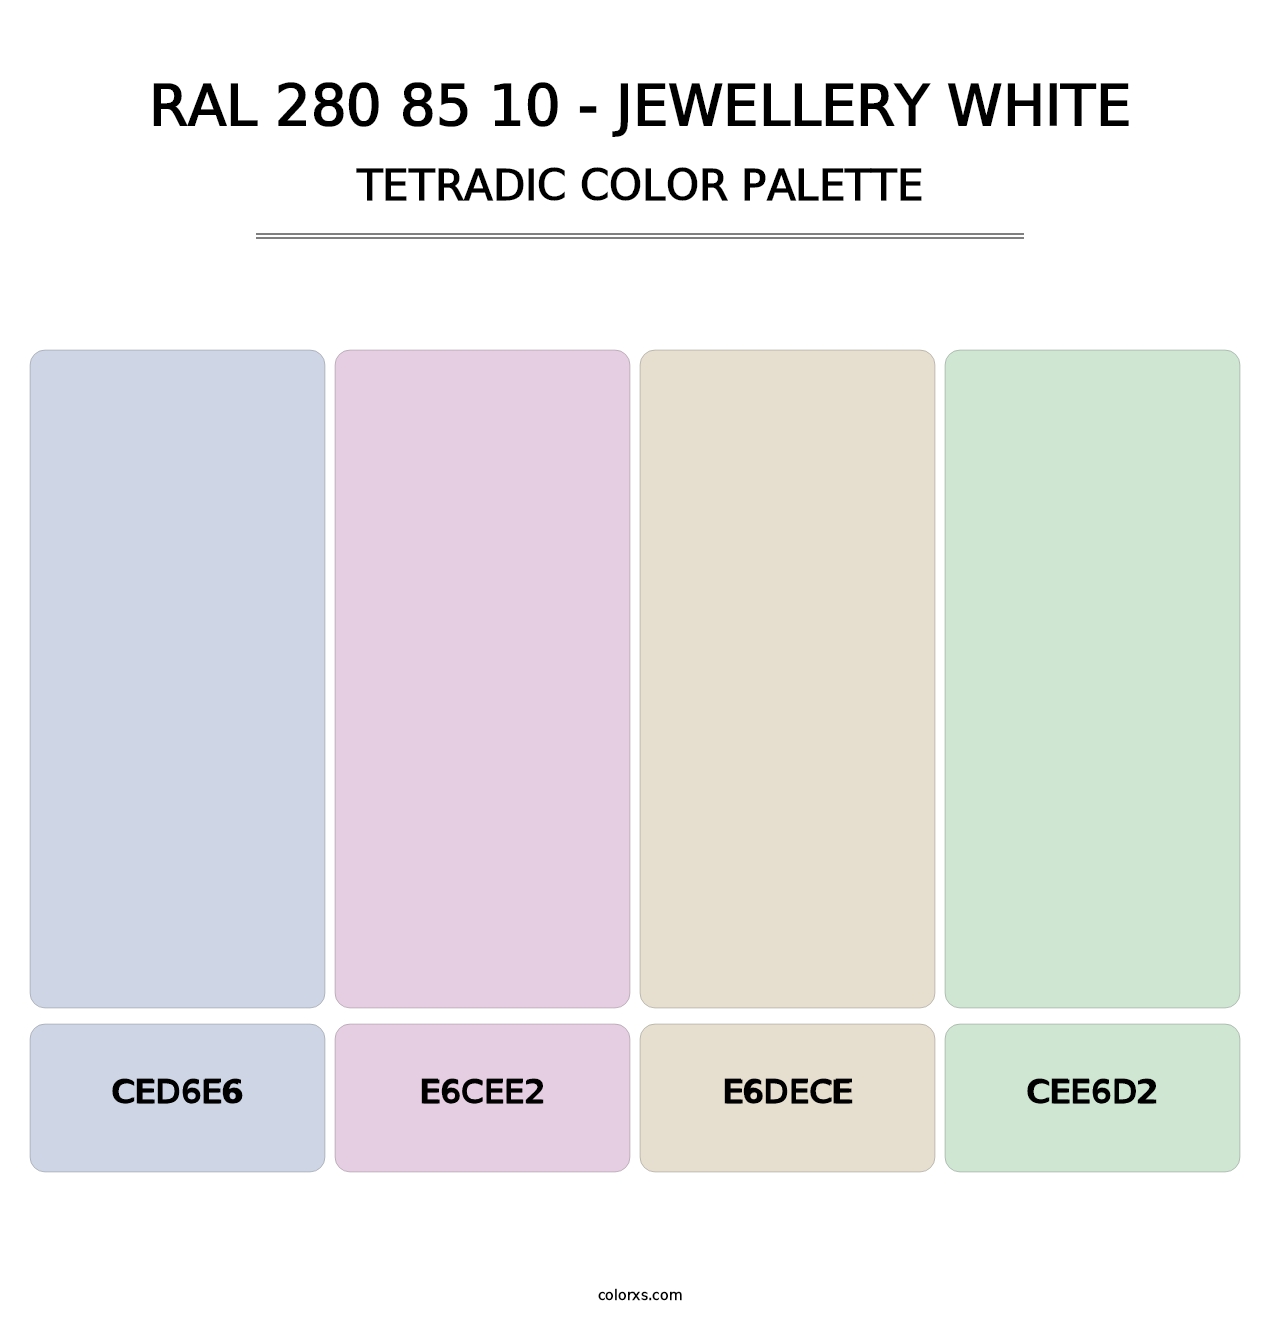 RAL 280 85 10 - Jewellery White - Tetradic Color Palette